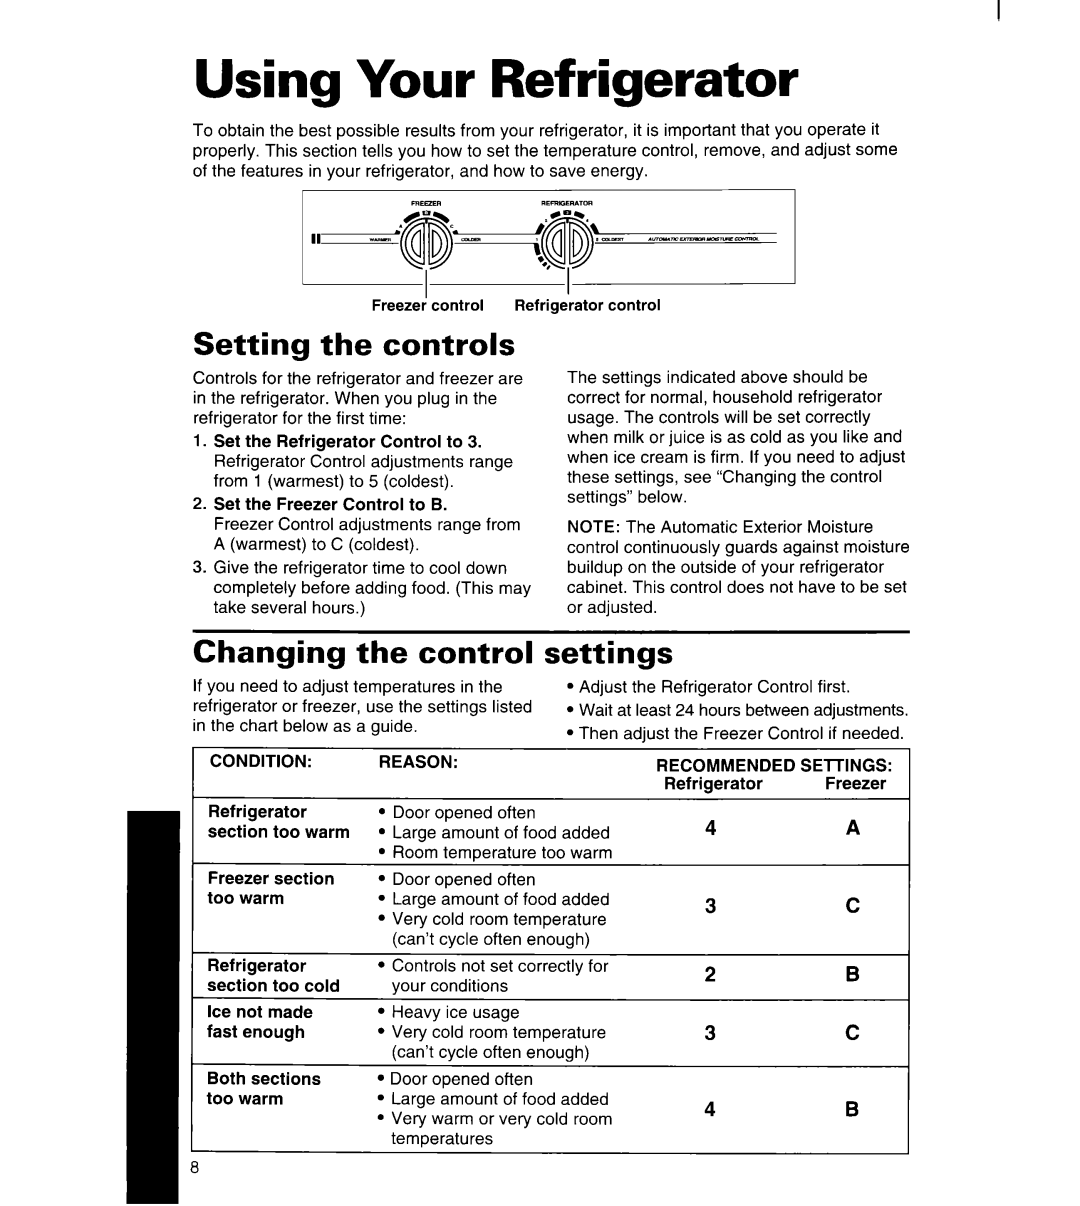 Whirlpool 4YED27DQDN00 manual Using Your Refrigerator, Setting the controls, Changing the control, settings, 3C 2B 3C 4B 